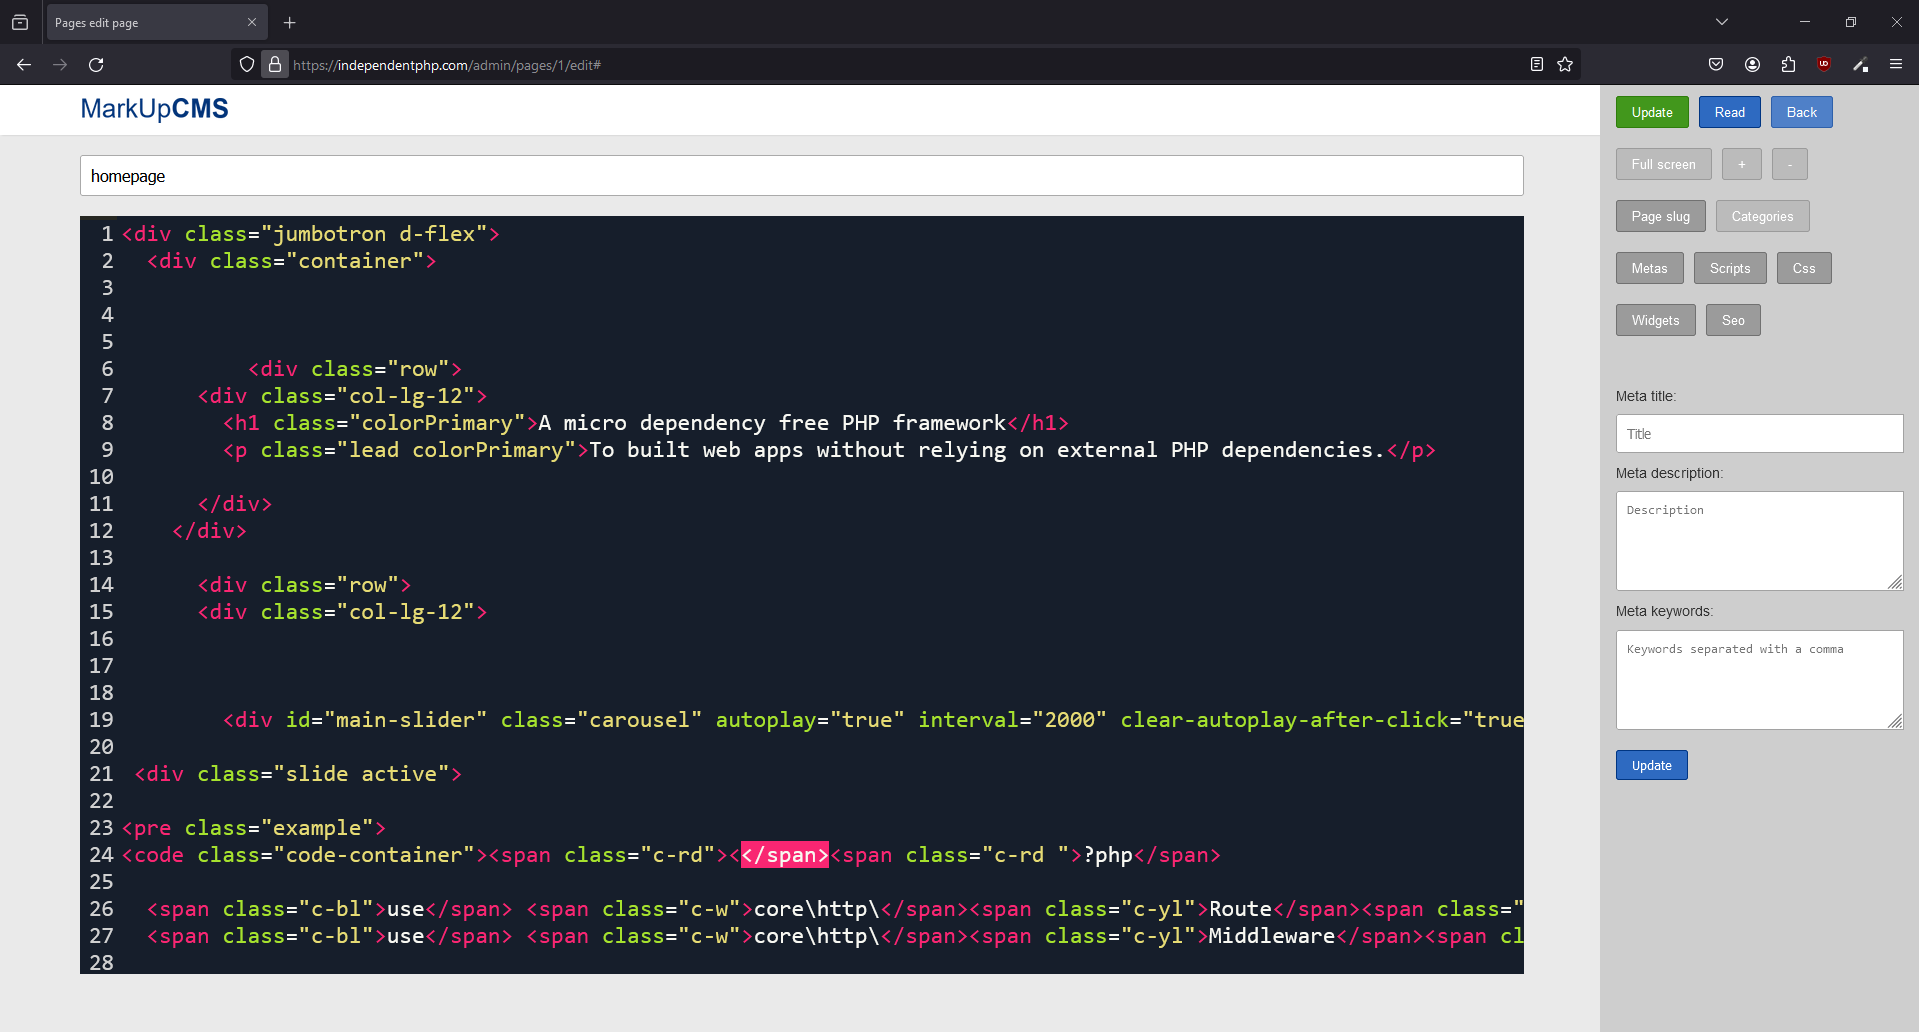 A screenshot of the pages edit page on zoom mode in MarkUpCMS